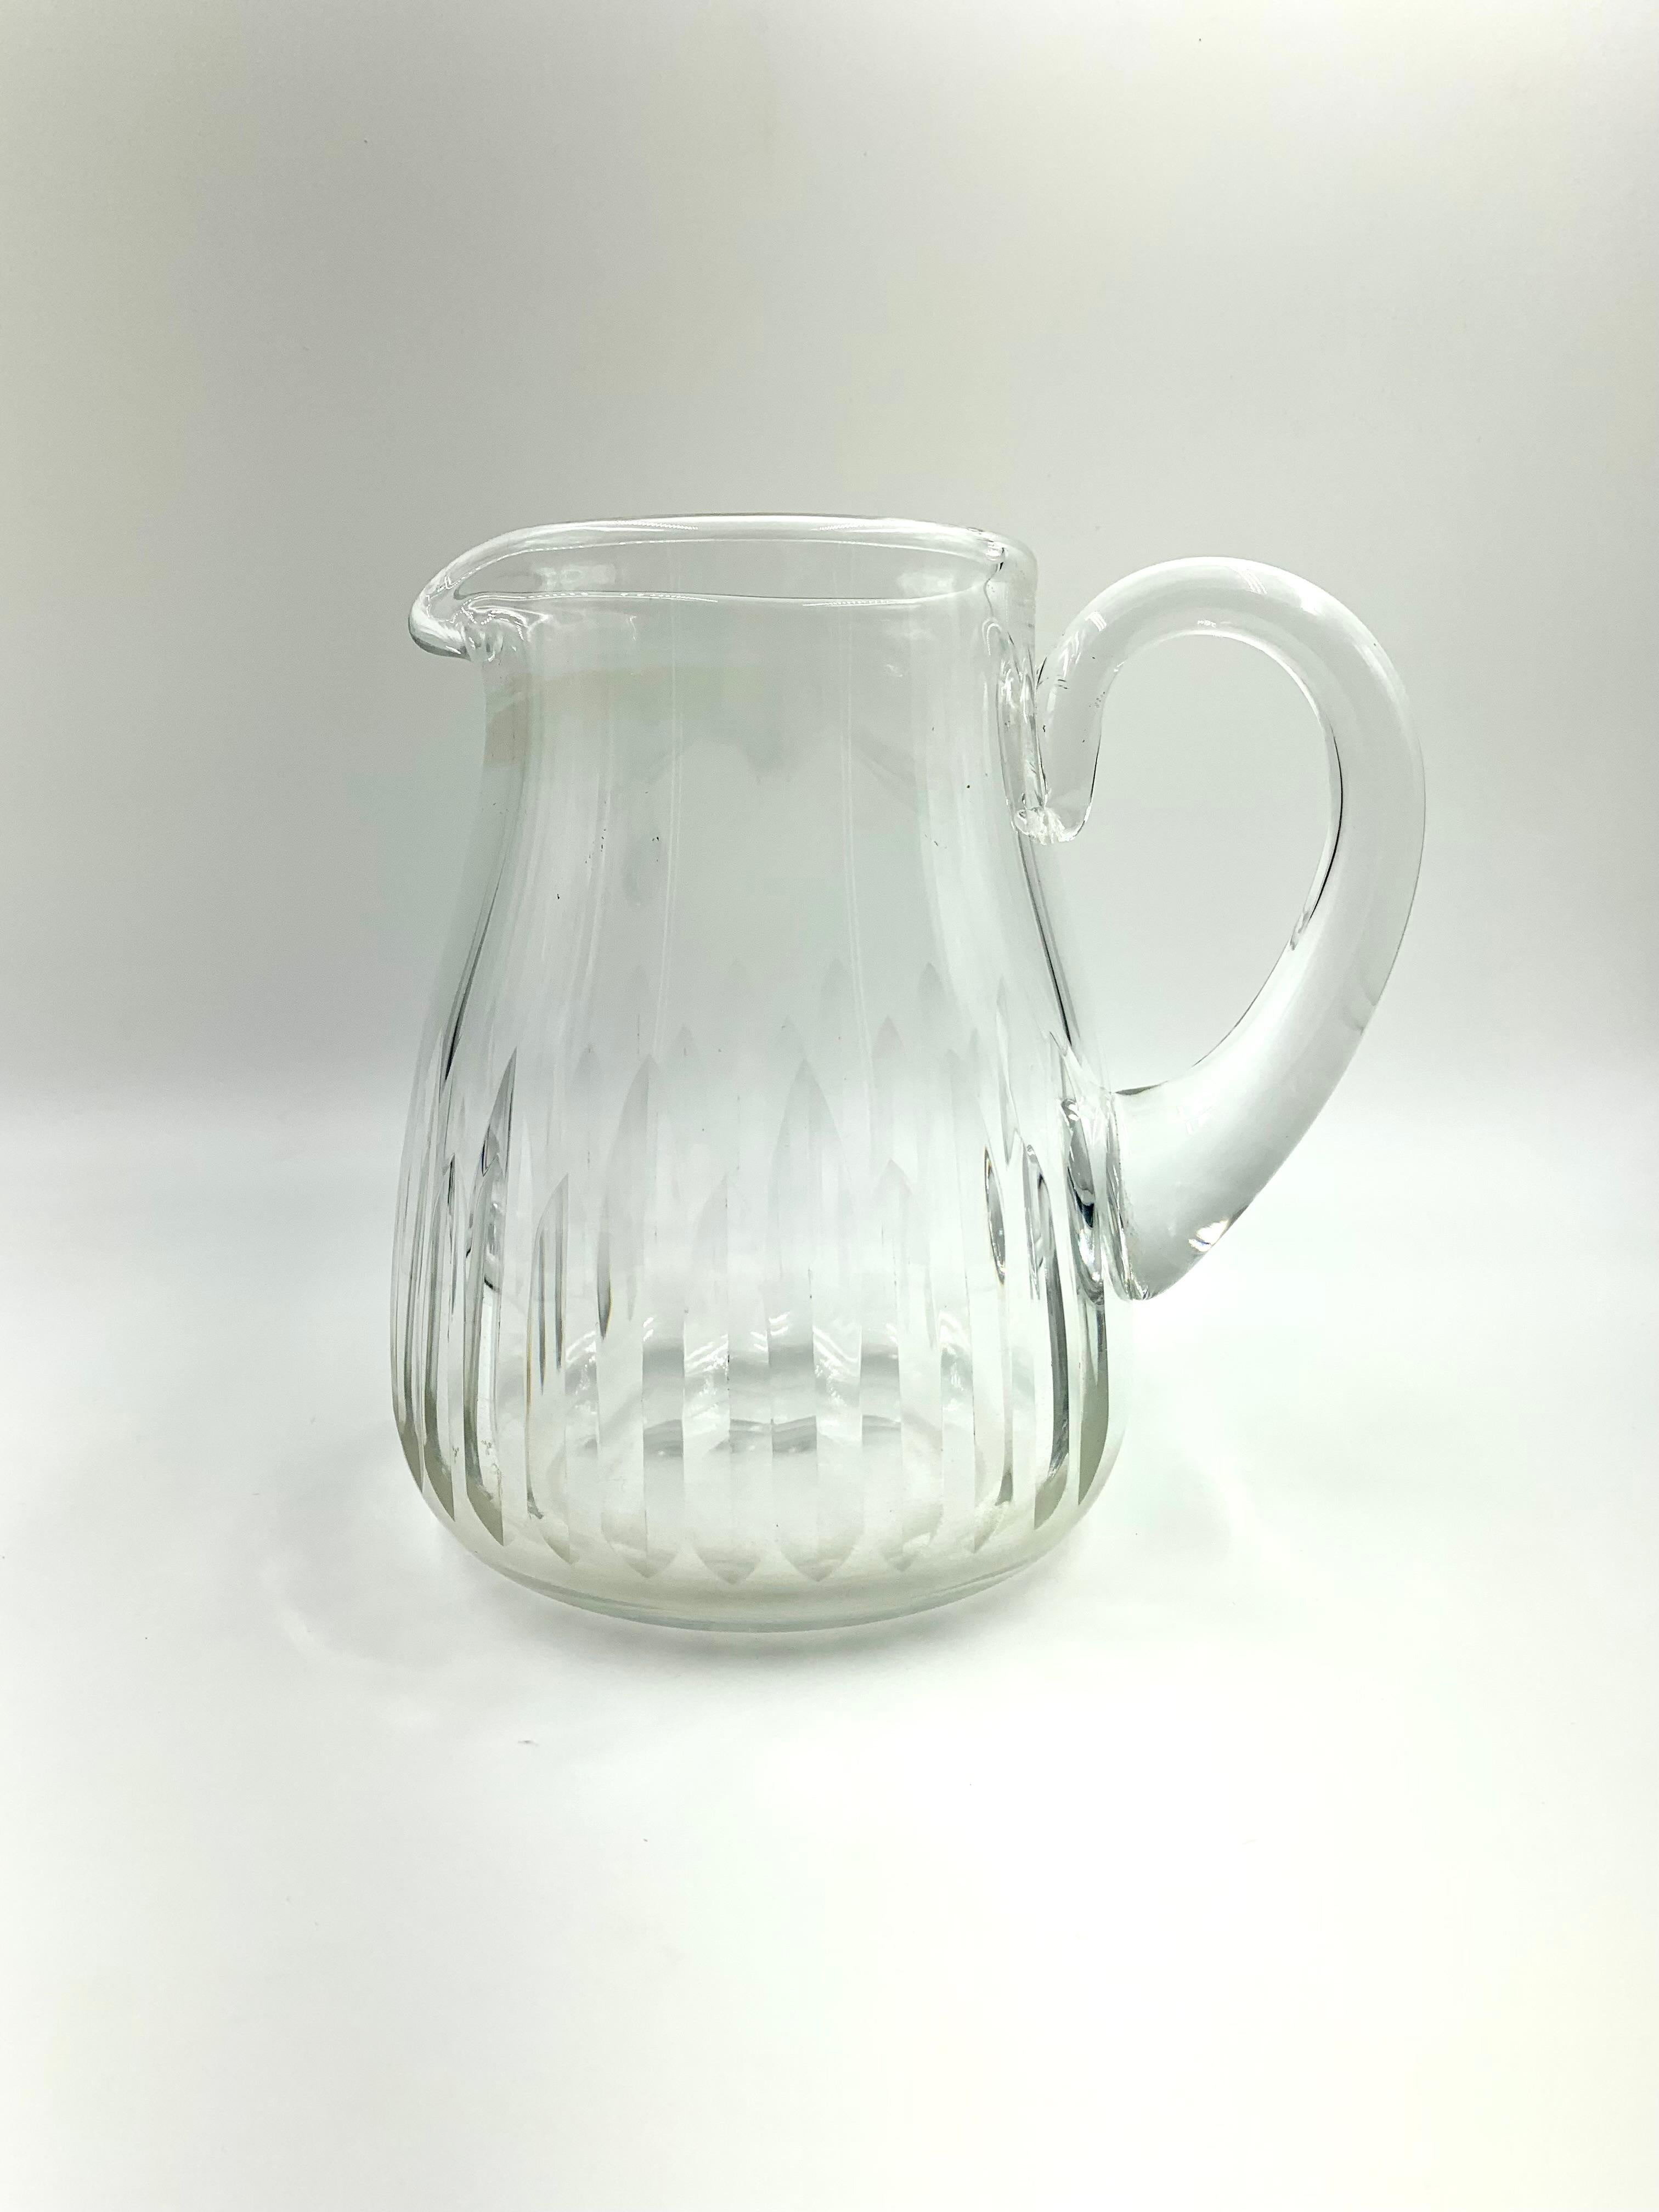 Estate Baccarat Lorraine pattern crystal cocktail/water pitcher
Scarce pattern, out of production
Substantial, heavy crystal with hand faceted design
Condition: Good, light surface wear at the base and interior
Marks: Baccarat circular signature at